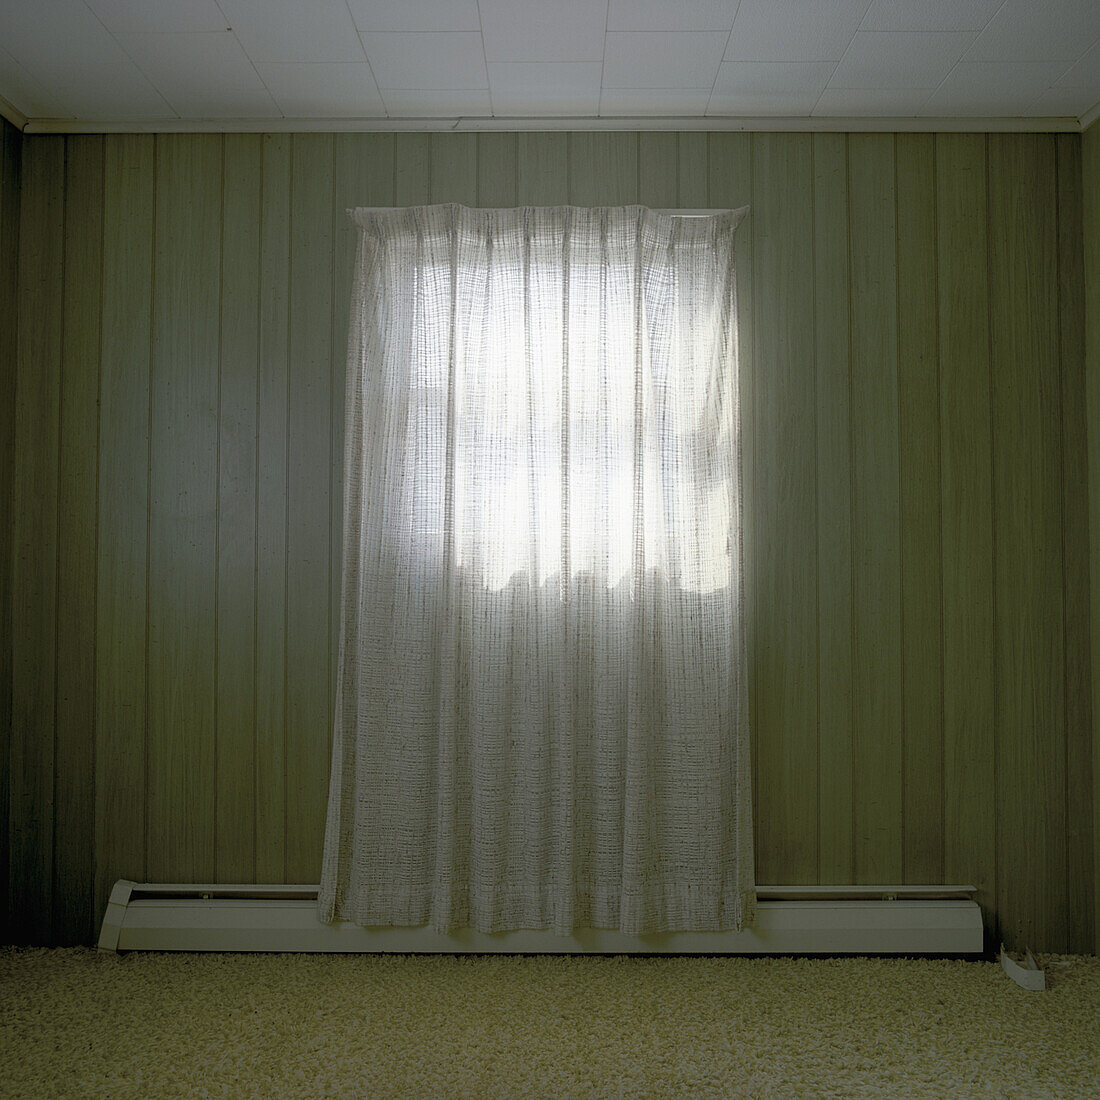 A room bare of furniture with a single curtained window